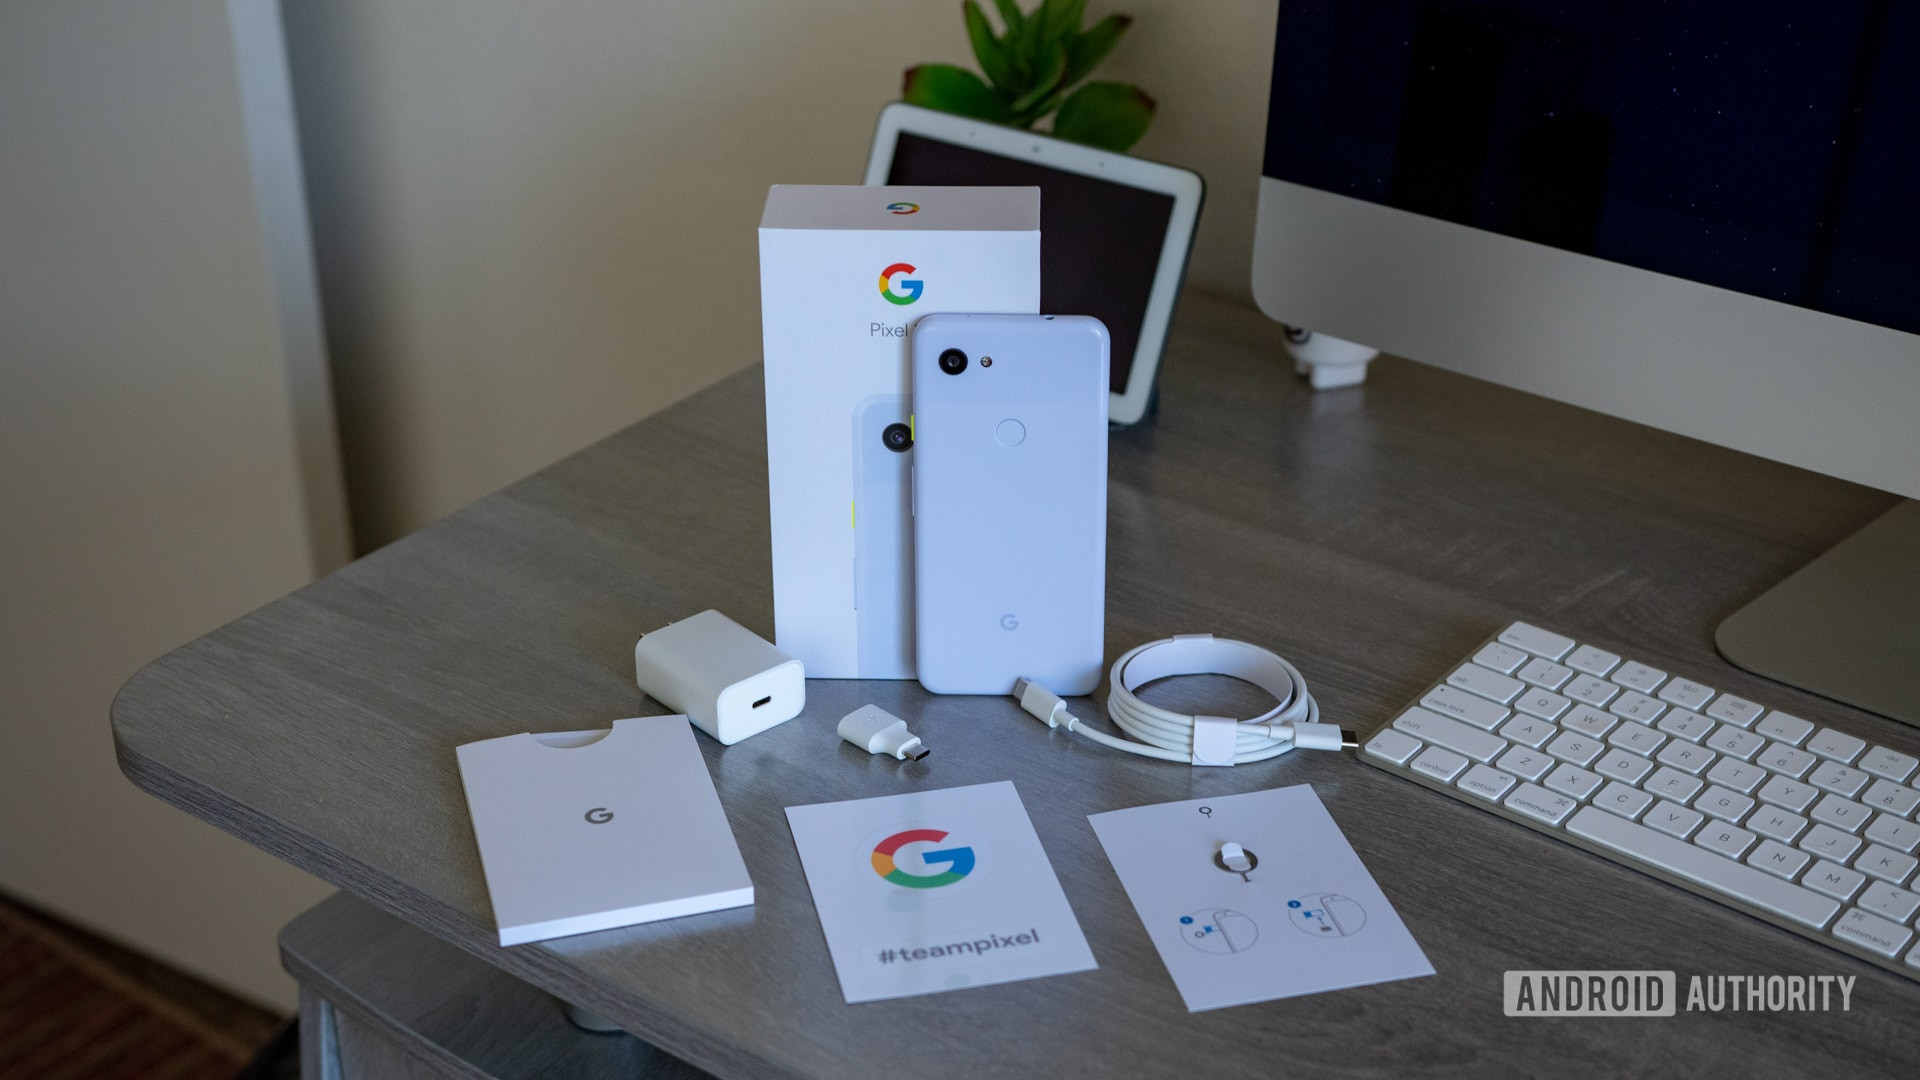 Google Pixel 3a What's in the box